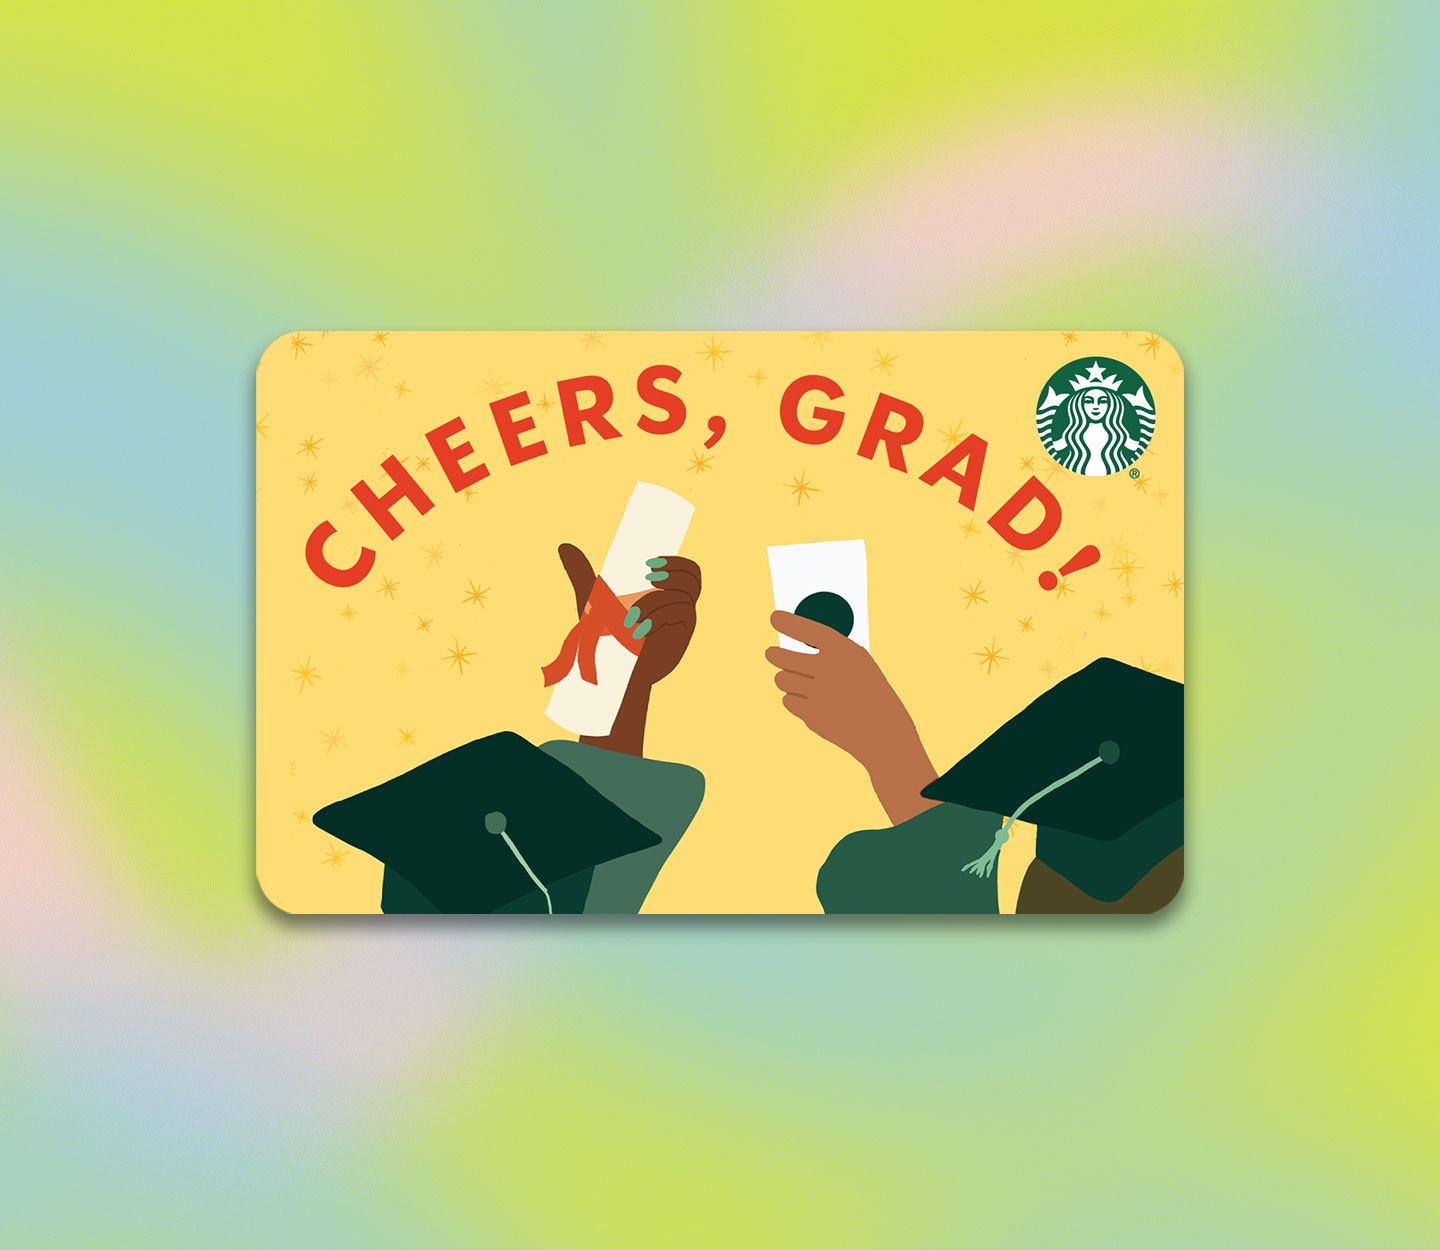 A Starbucks gift card that says, “Cheers, grad!” and shows a graduate holding a diploma next to one holding a to-go coffee cup.